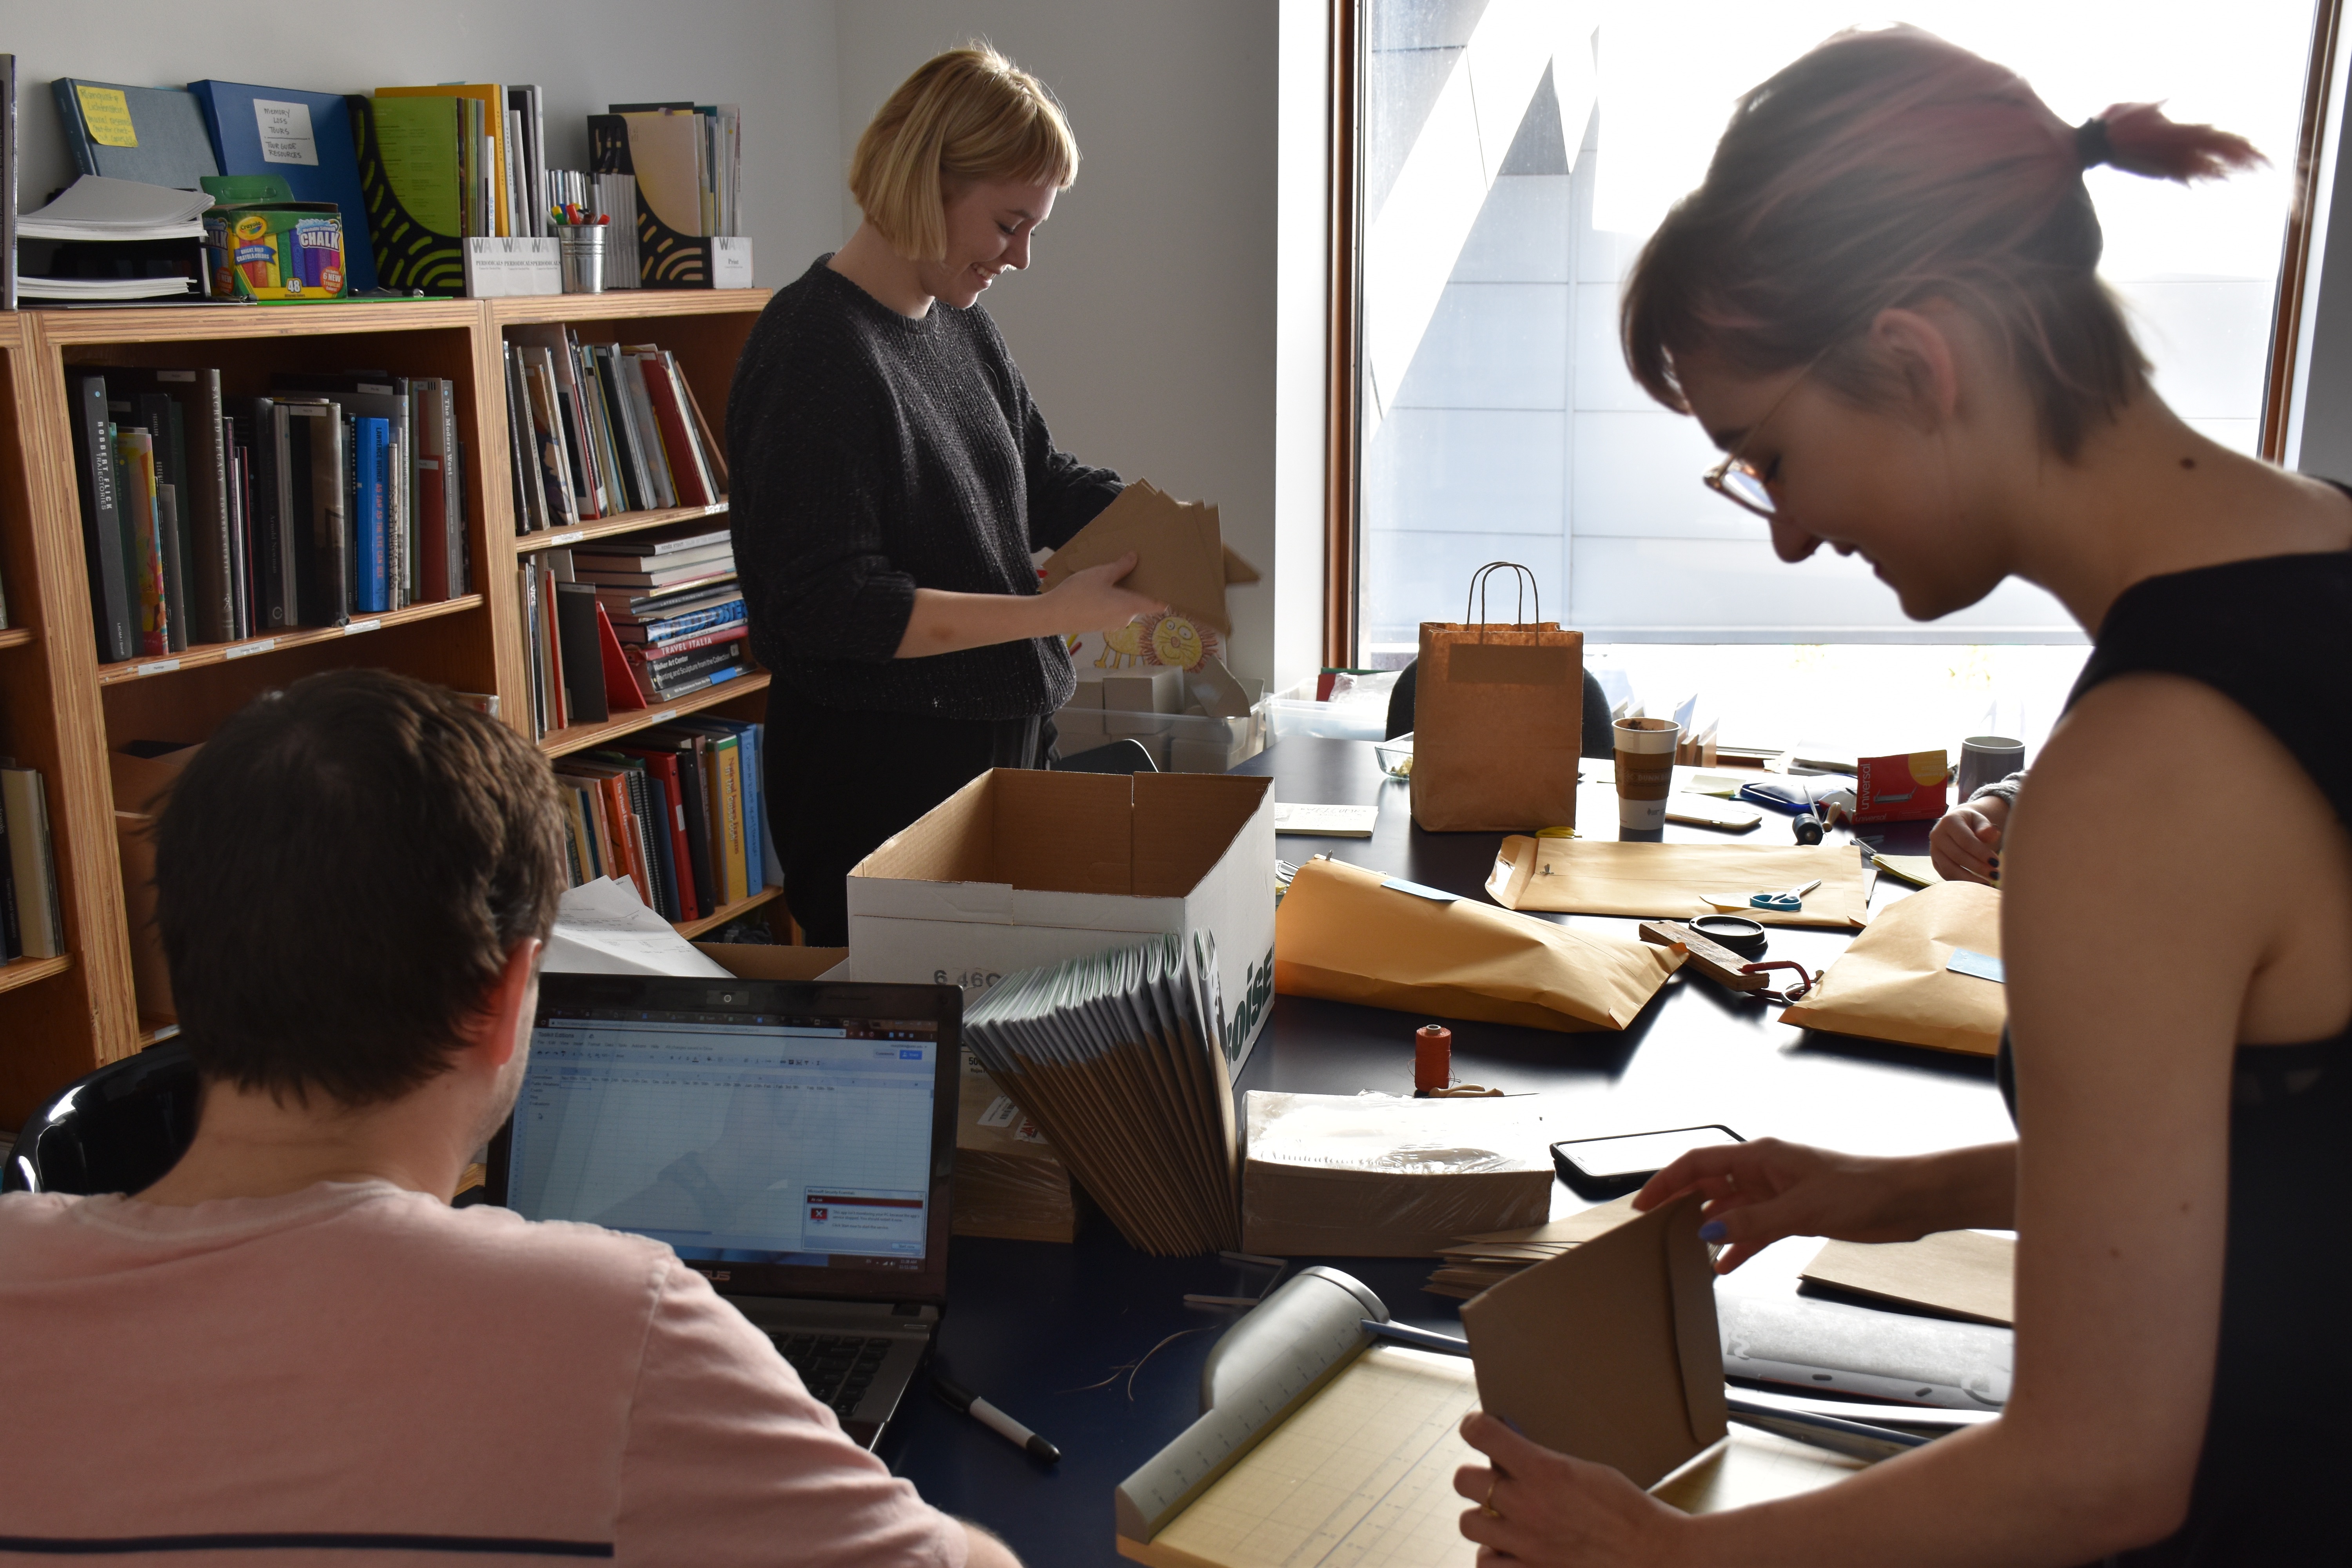 WAM Collective Members Keith Murphy, Lexi Herman, and Anya Udovik assembling our hand-bound Wellness Toolkits